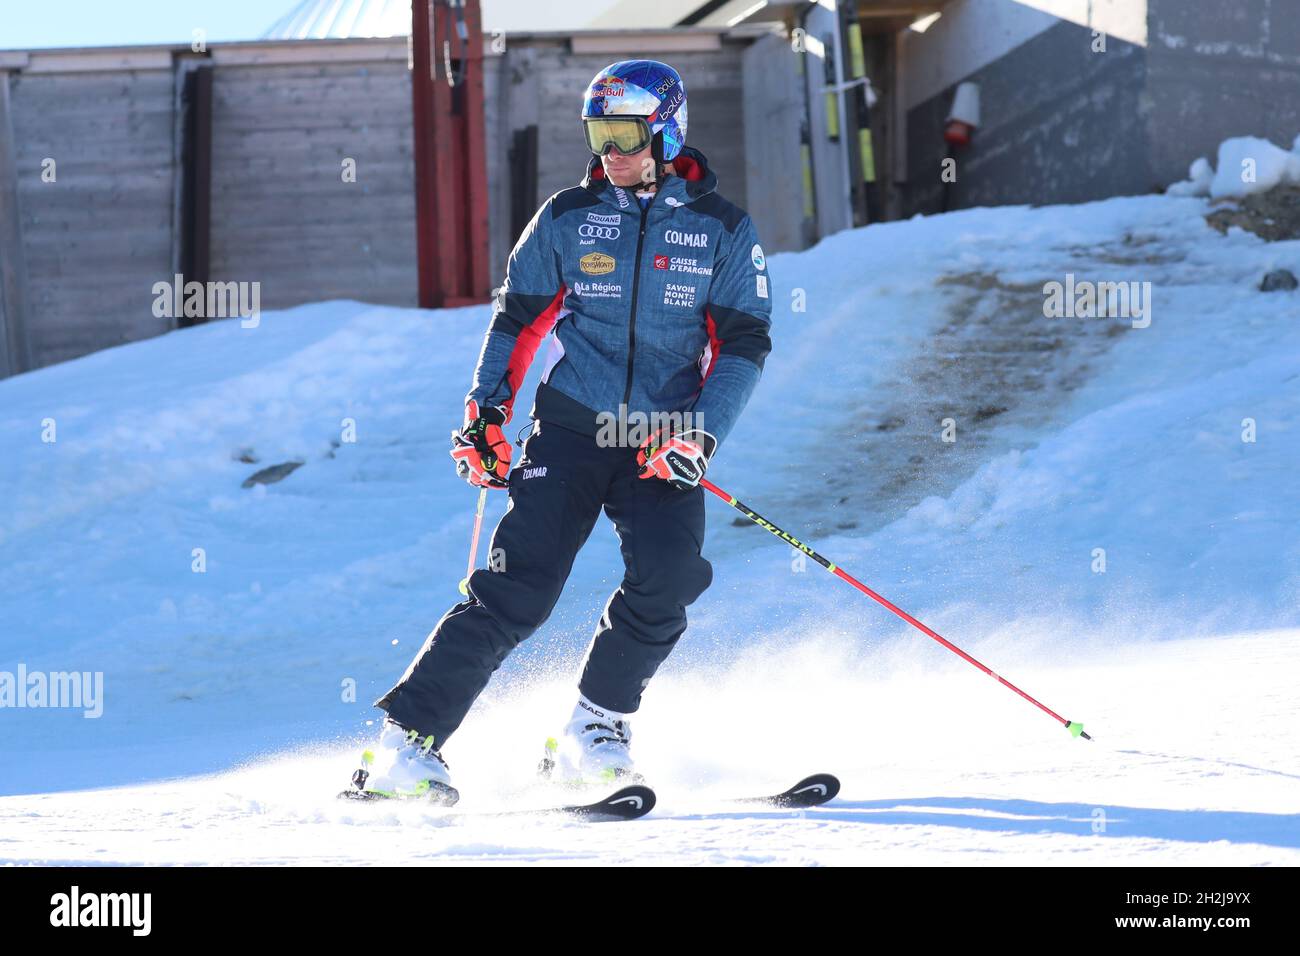 Solden, Austria. 22nd Oct, 2021. Alpine Ski World Cup 2021-2022 - French alpine skier and Overall Winner Alexis Pinturault trains before the Giant Slalom opening race as part of the Alpine Ski World Cup in Solden on October 22, 2021; Alexis Pinturault (Photo by Pierre Teyssot/ESPA-Images) Credit: European Sports Photo Agency/Alamy Live News Stock Photo